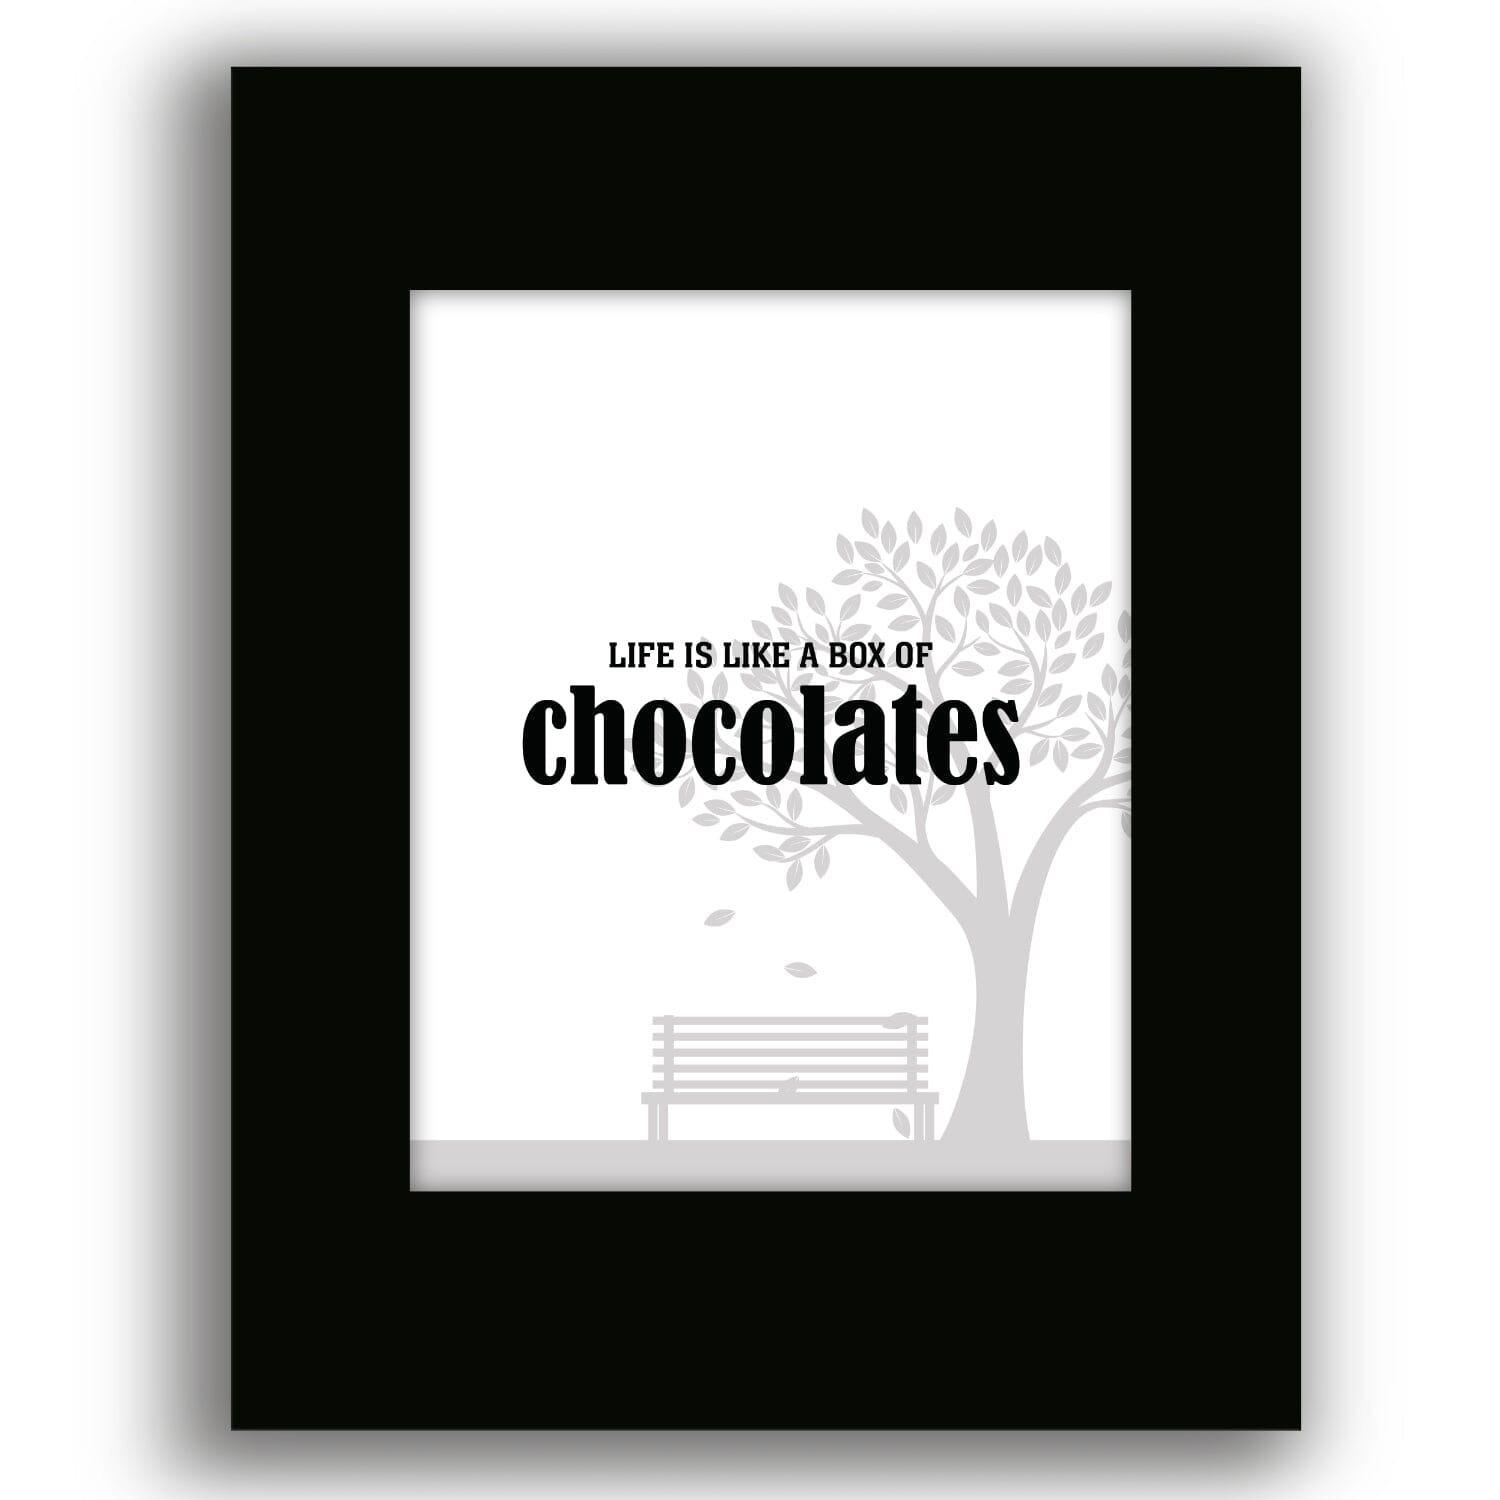 Life is Like a Box of Chocolates - Wise and Witty Quote Art Wise and Wiseass Quotes Song Lyrics Art 8x10 Black Matted Print 